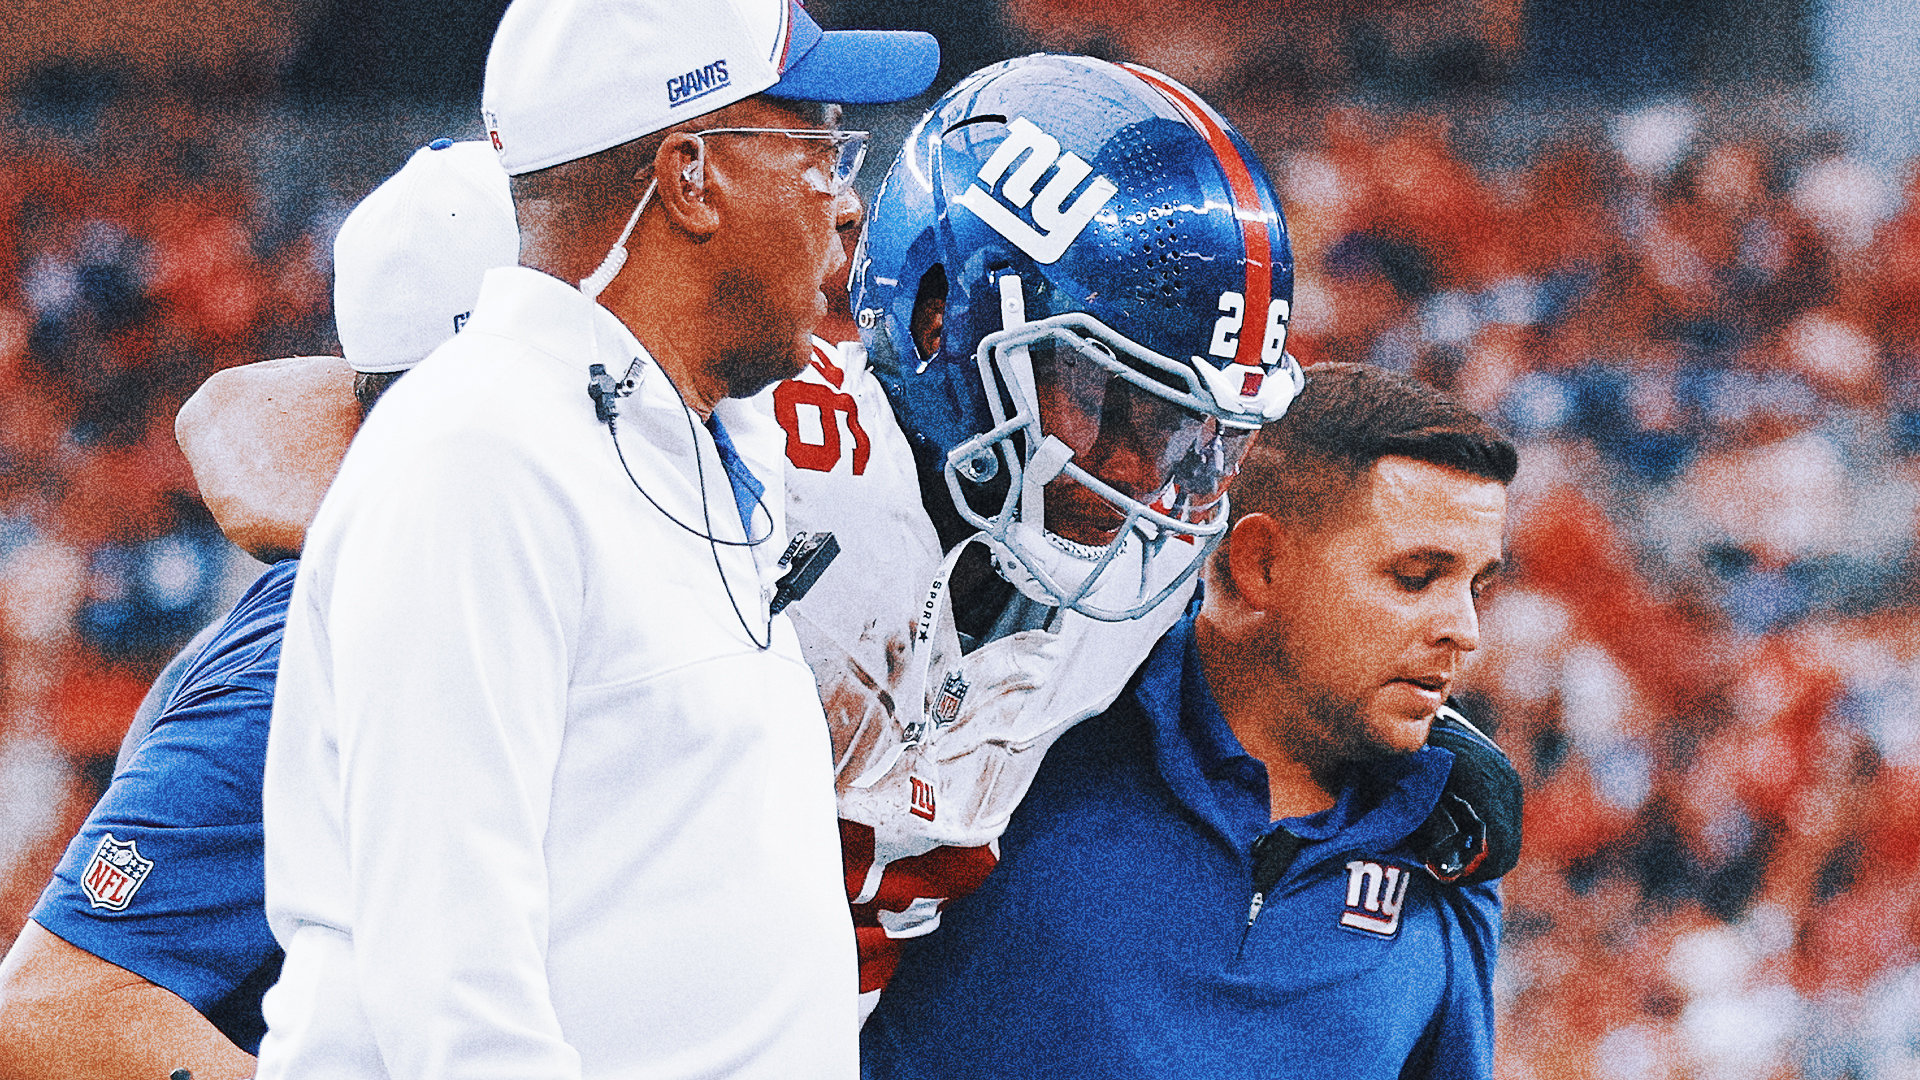 Saquon Barkley reportedly suffers 'ordinary' ankle sprain, will miss 3 weeks